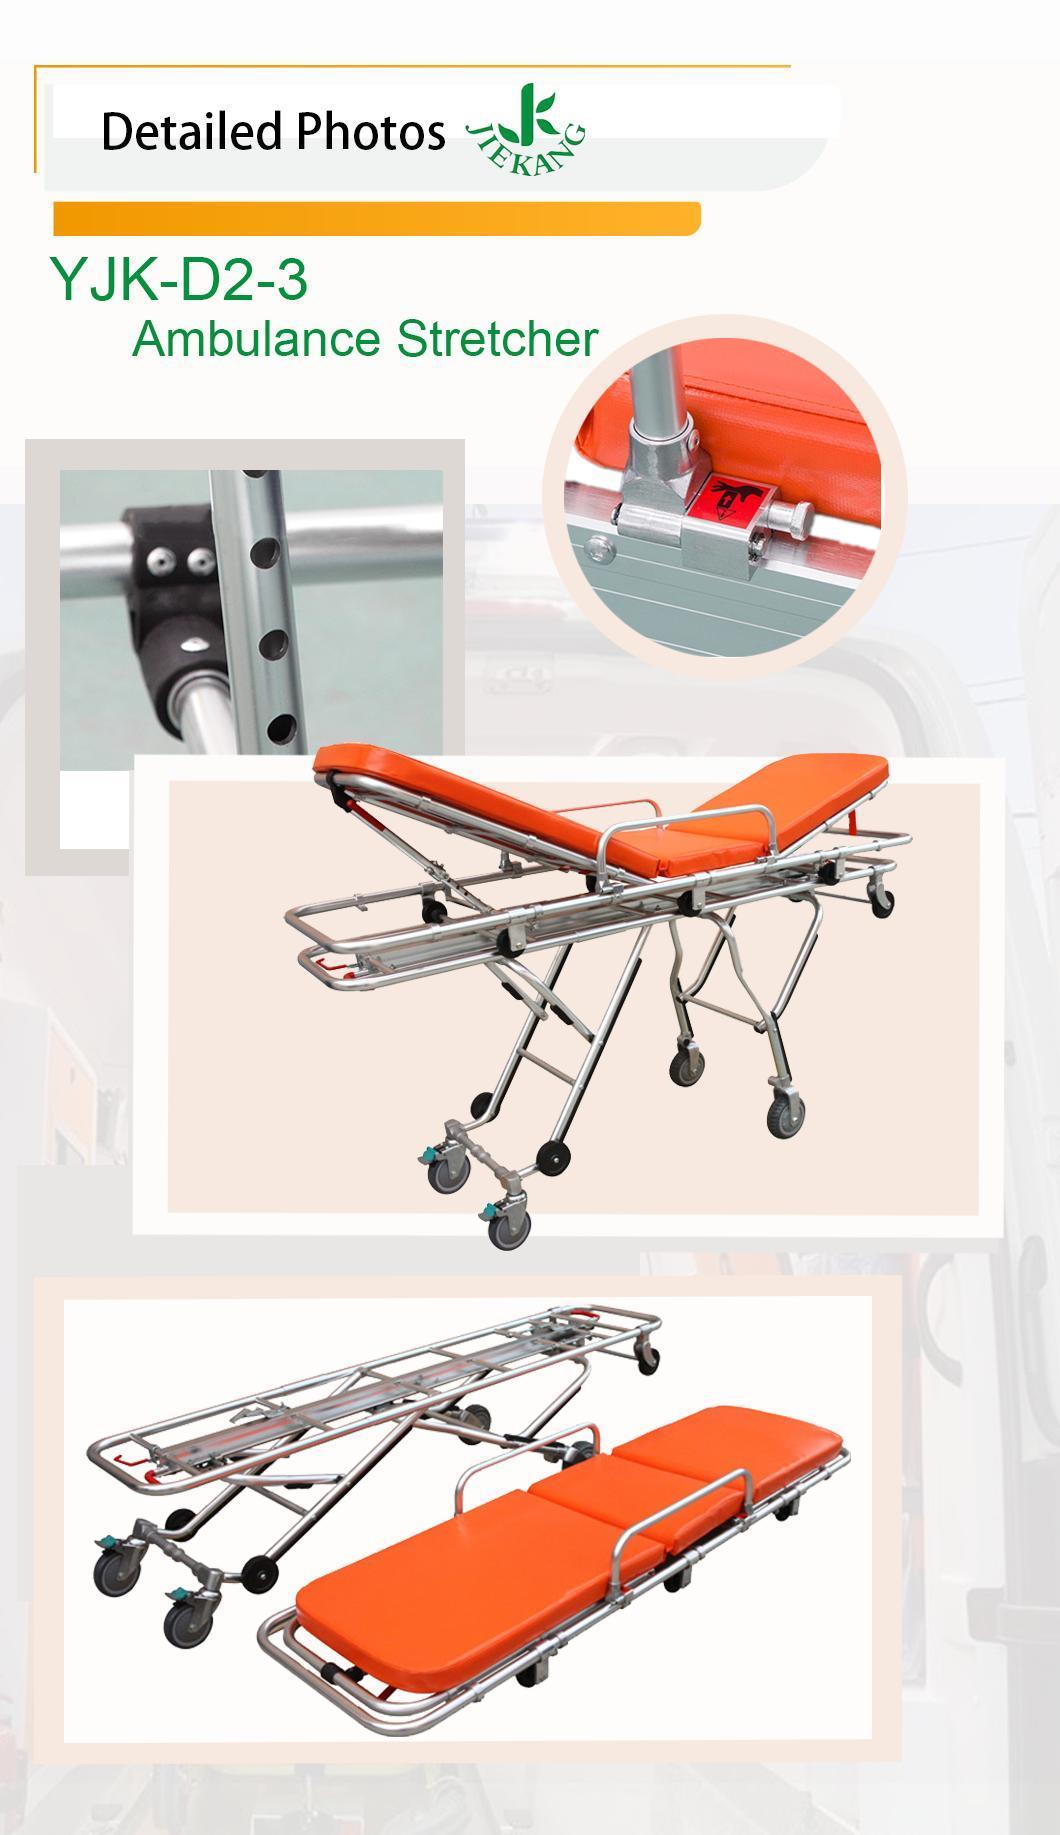 Hot Prices Hospital Emergence Rescue Patient Transfer Ambulance Stretcher